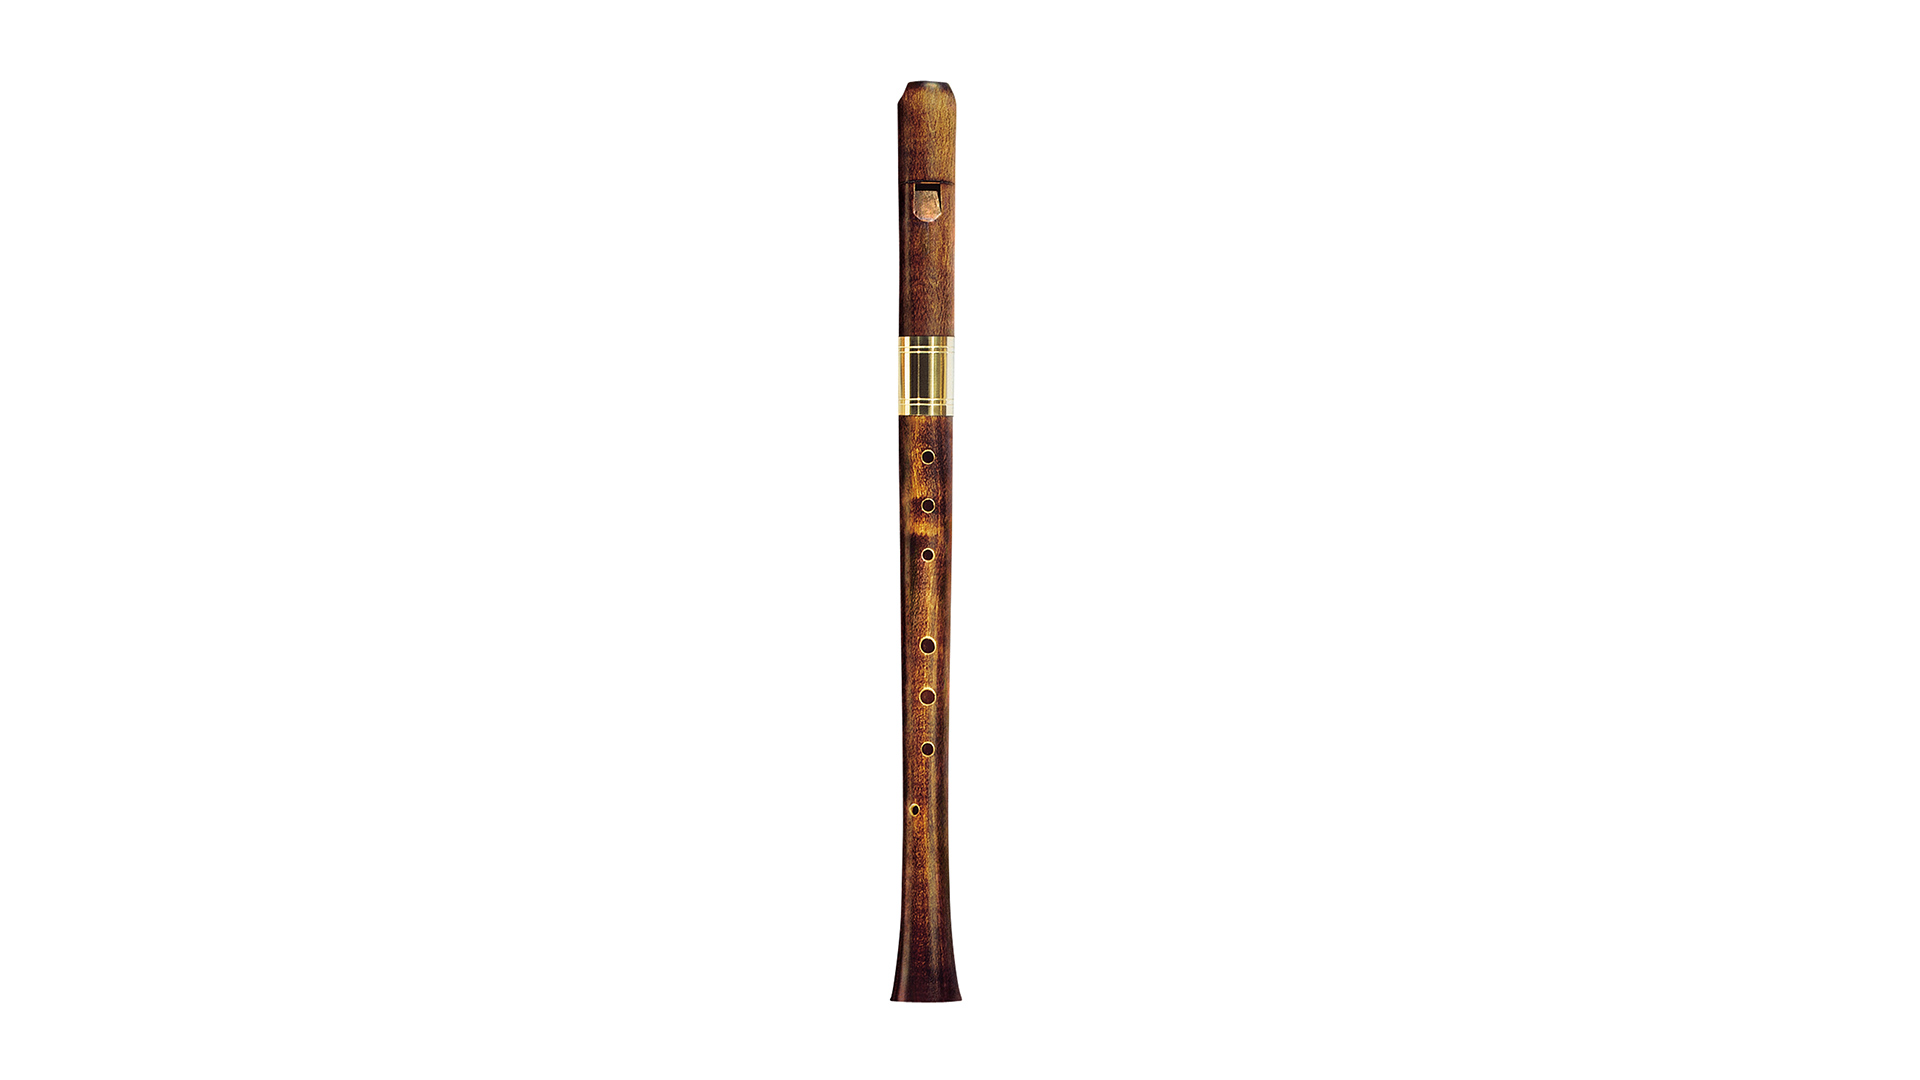 Moeck, "Renaissance Consort", alto in f', baroque single hole, 442 Hz, maple stained, 1.5 oct. range